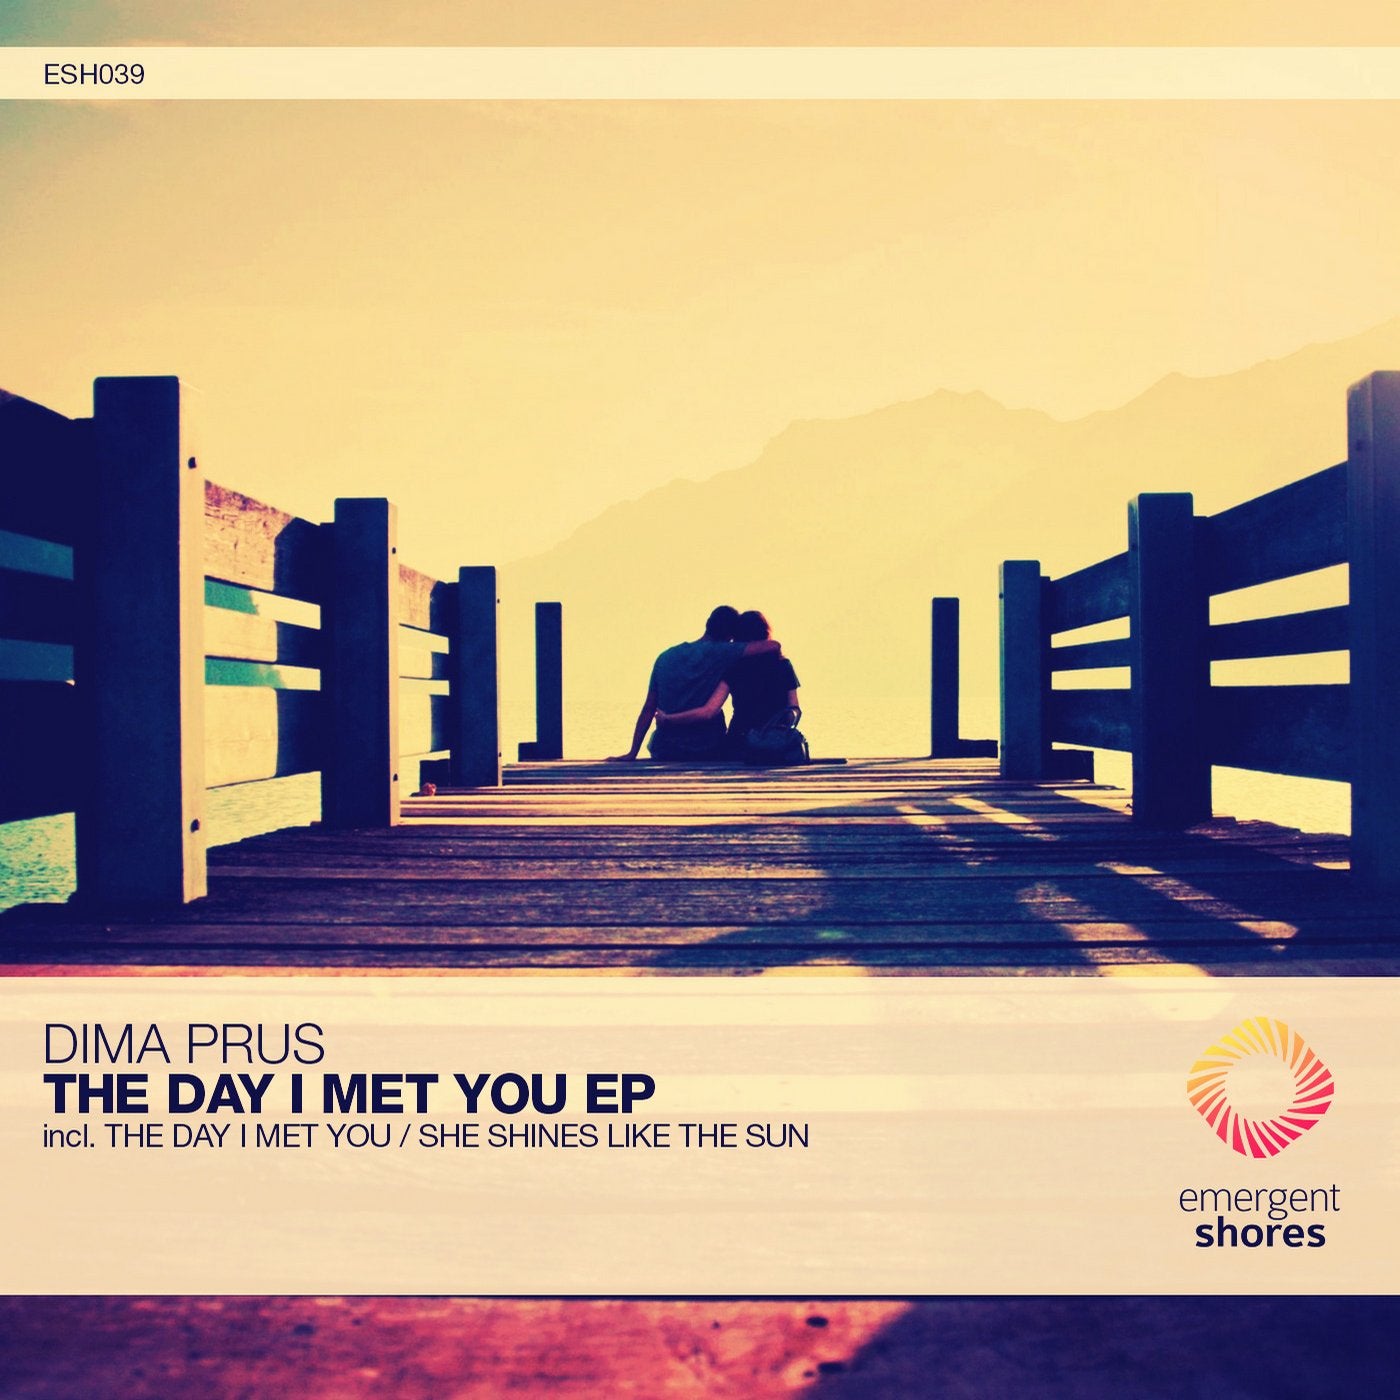 The Day I Met You / She Shines Like the Sun